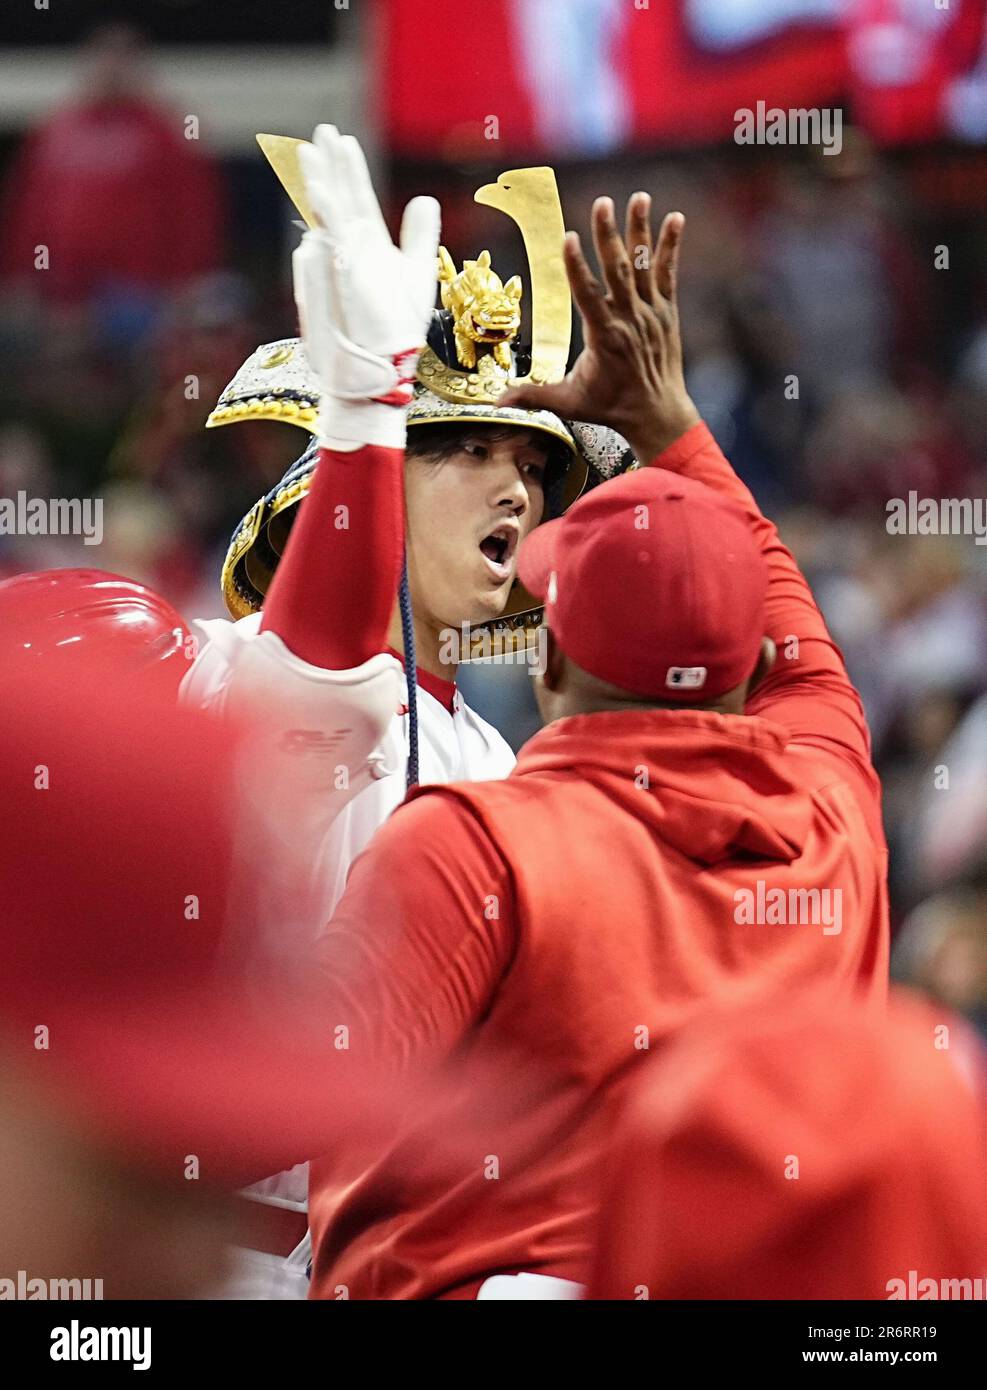 Shohei Ohtani of the Los Angeles Angels celebrates wearing a